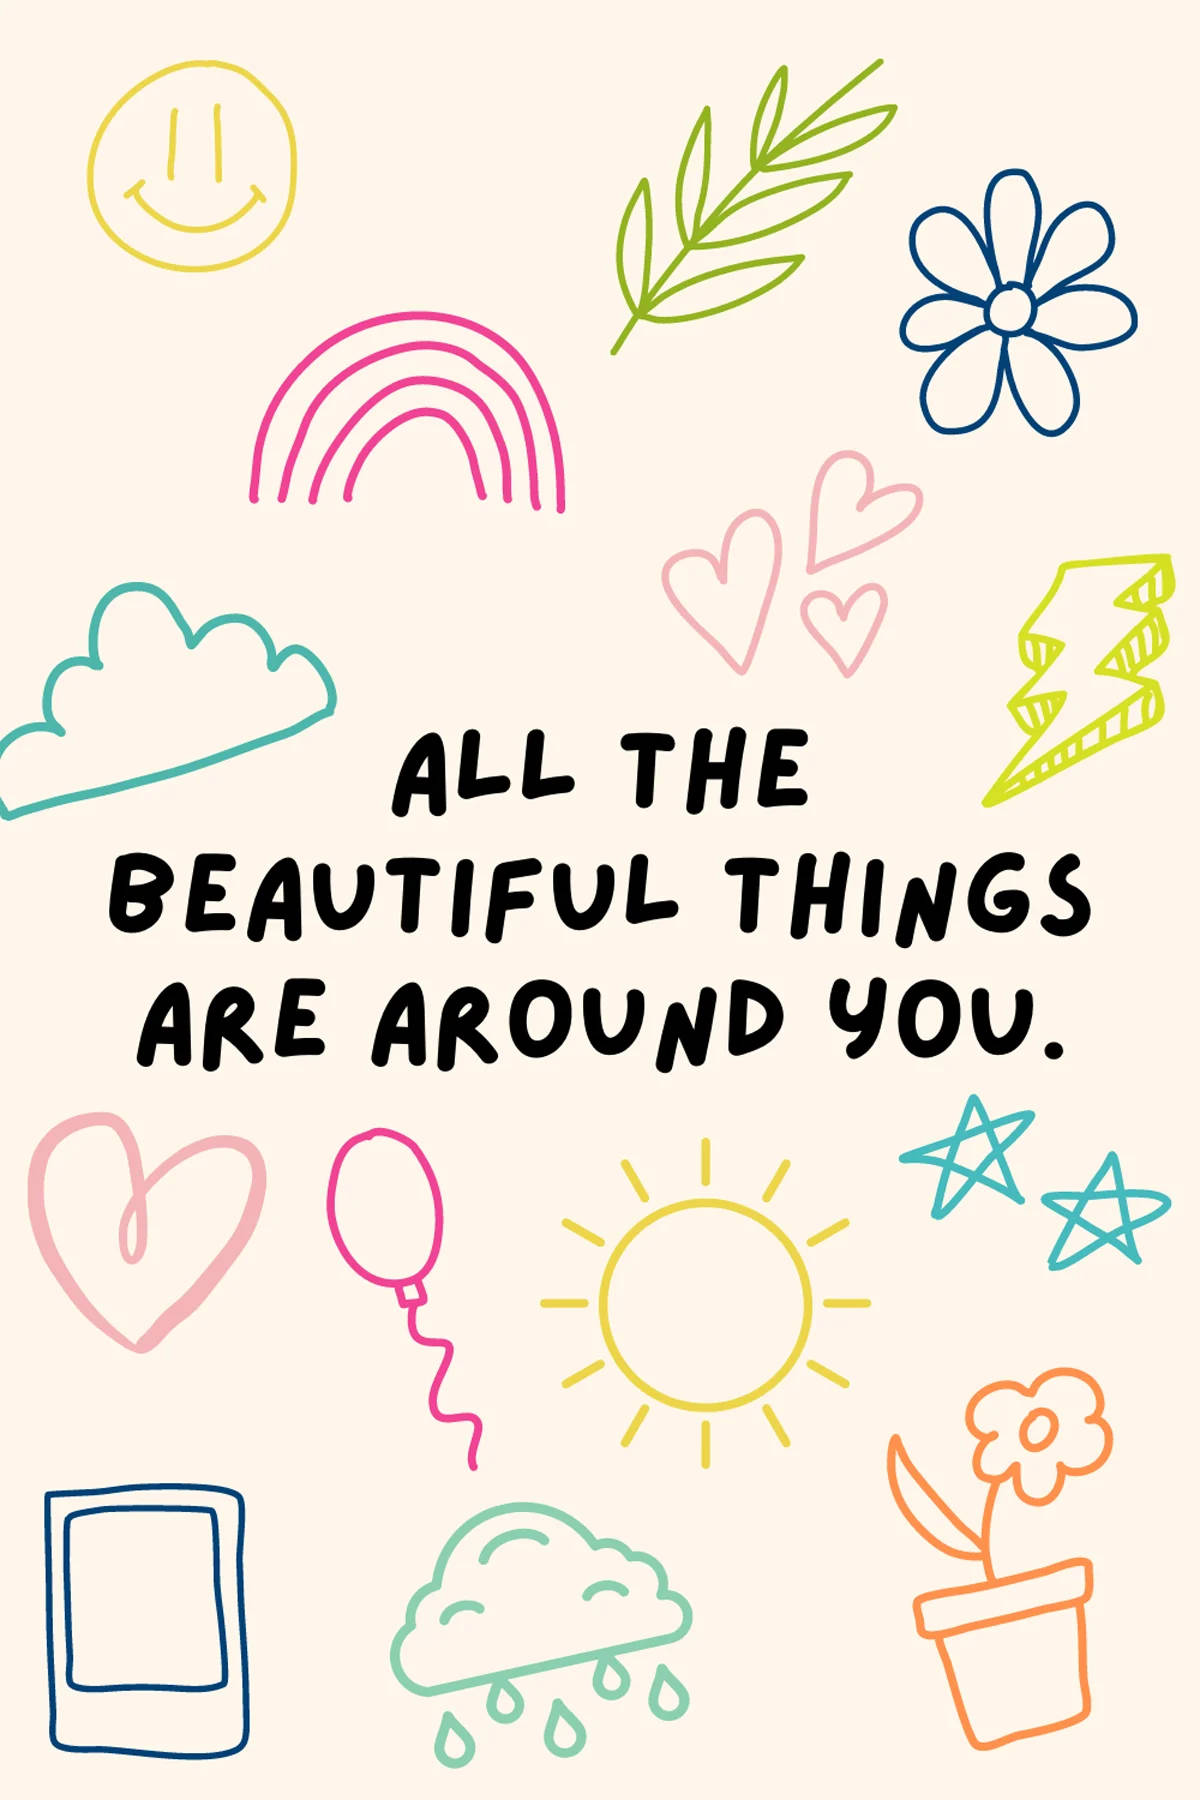 Download Motivational Quotes Aesthetic Beautiful Things Wallpaper